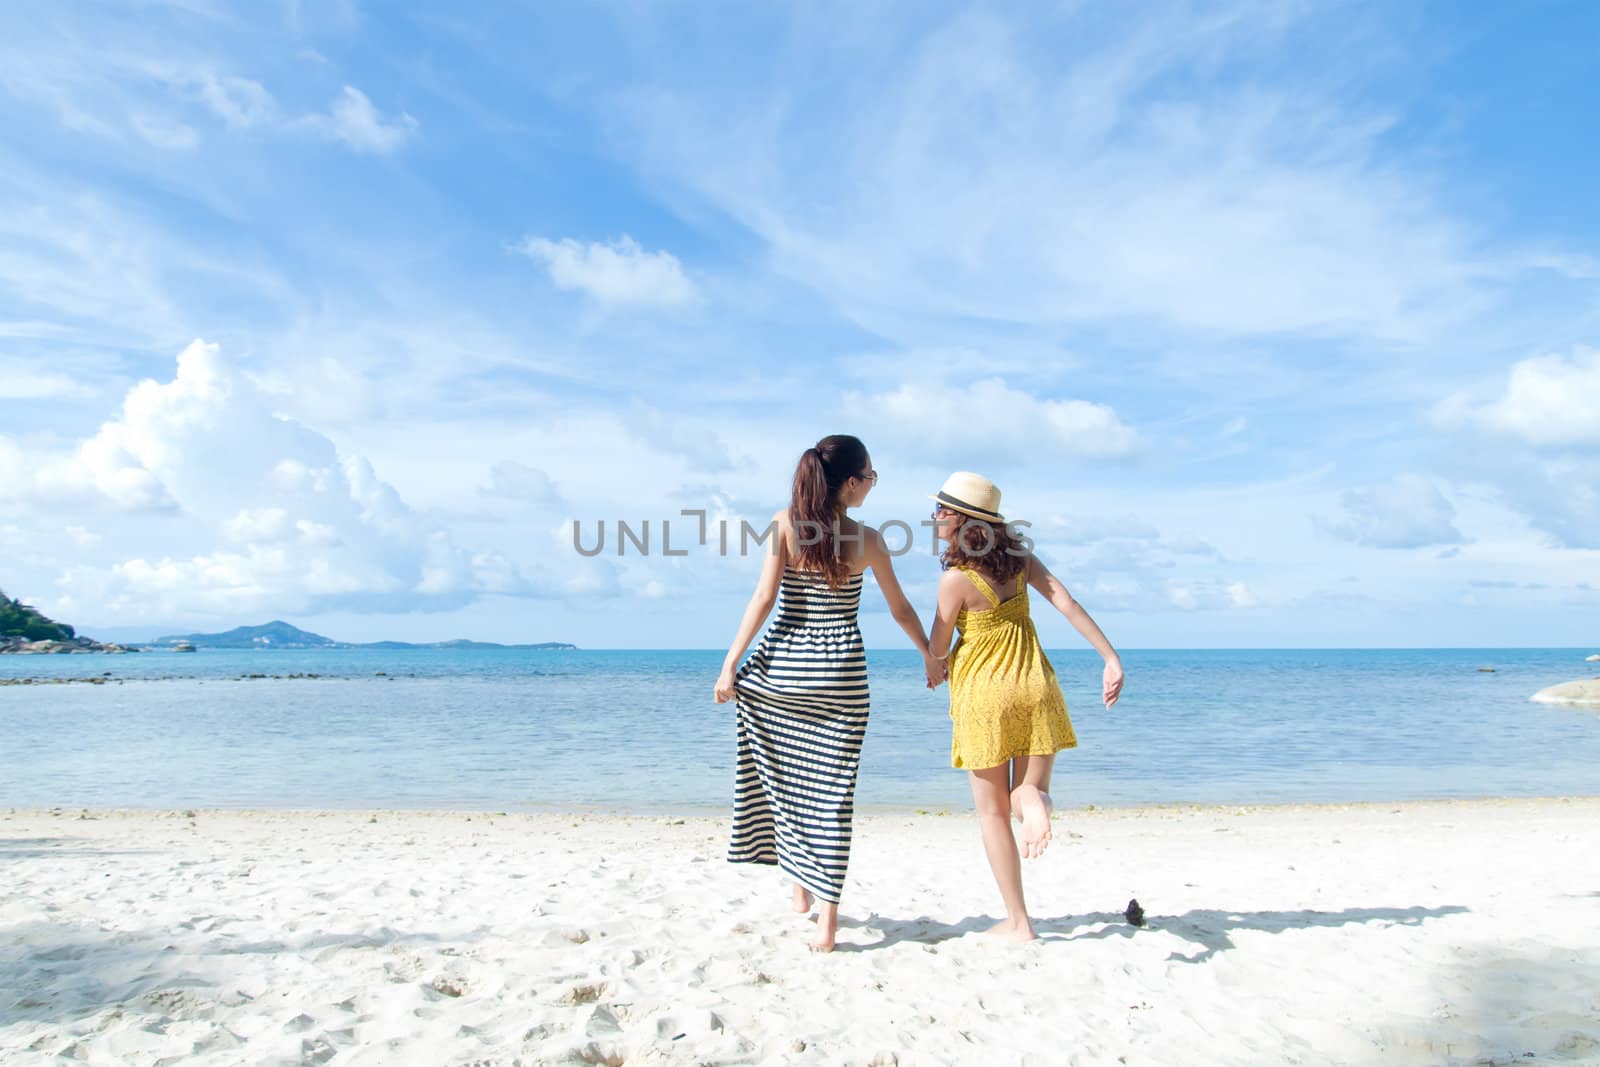 woman happy together on sand beach with blue sky background by jakgree